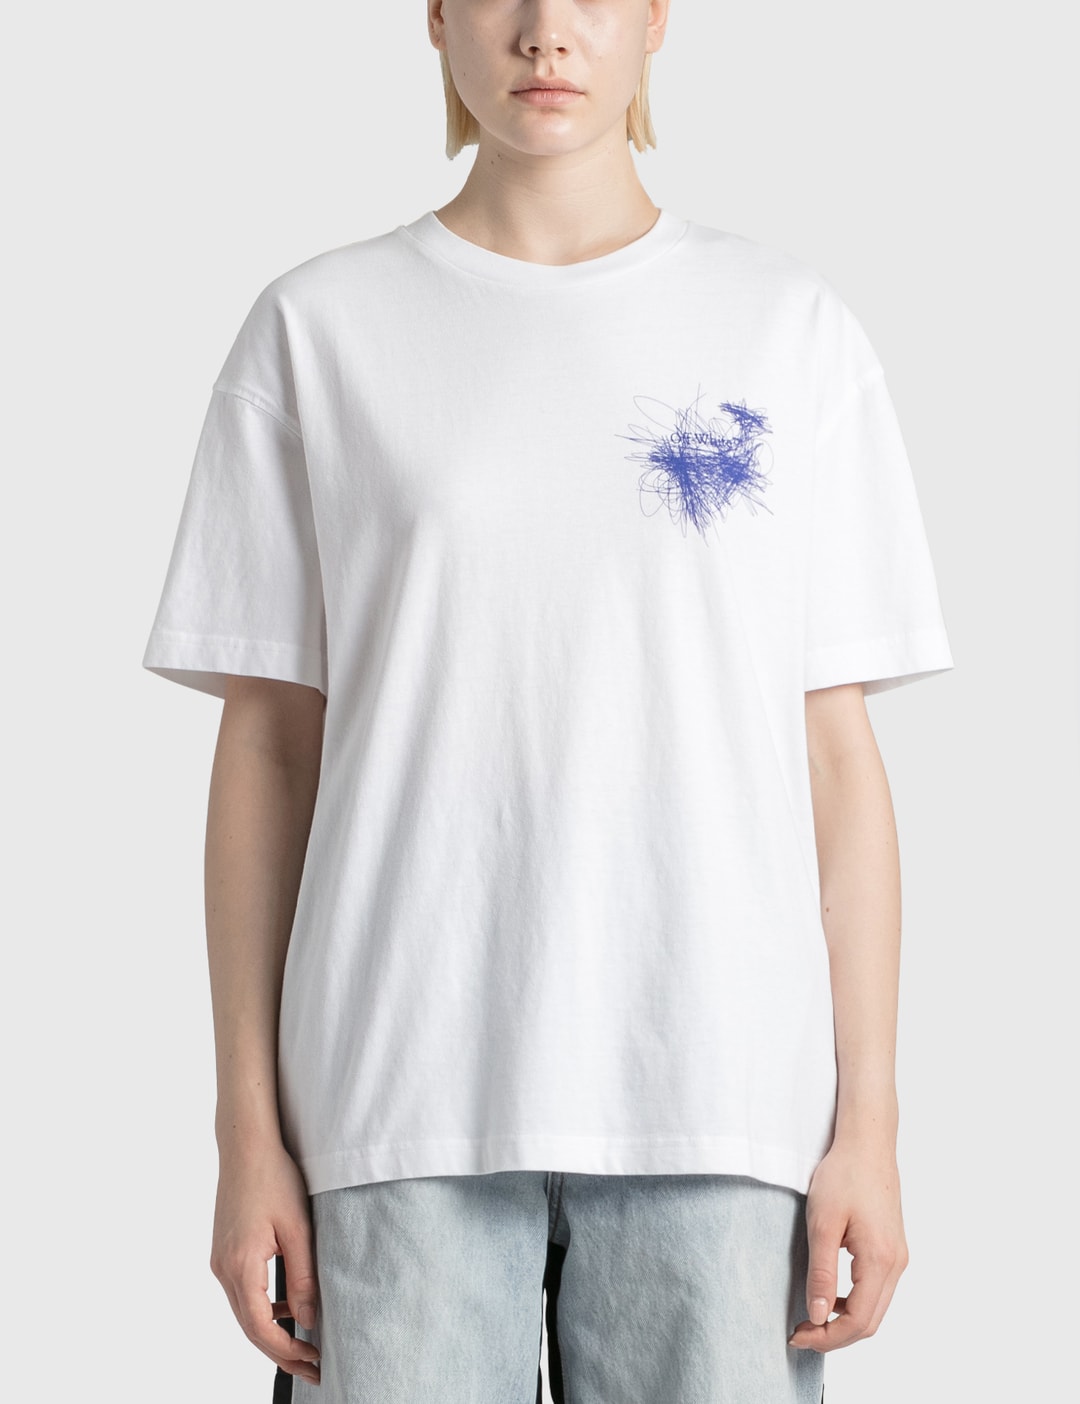 Off-White™ - Paint Arrow Slim Short Sleeve T-shirt  HBX - Globally Curated  Fashion and Lifestyle by Hypebeast